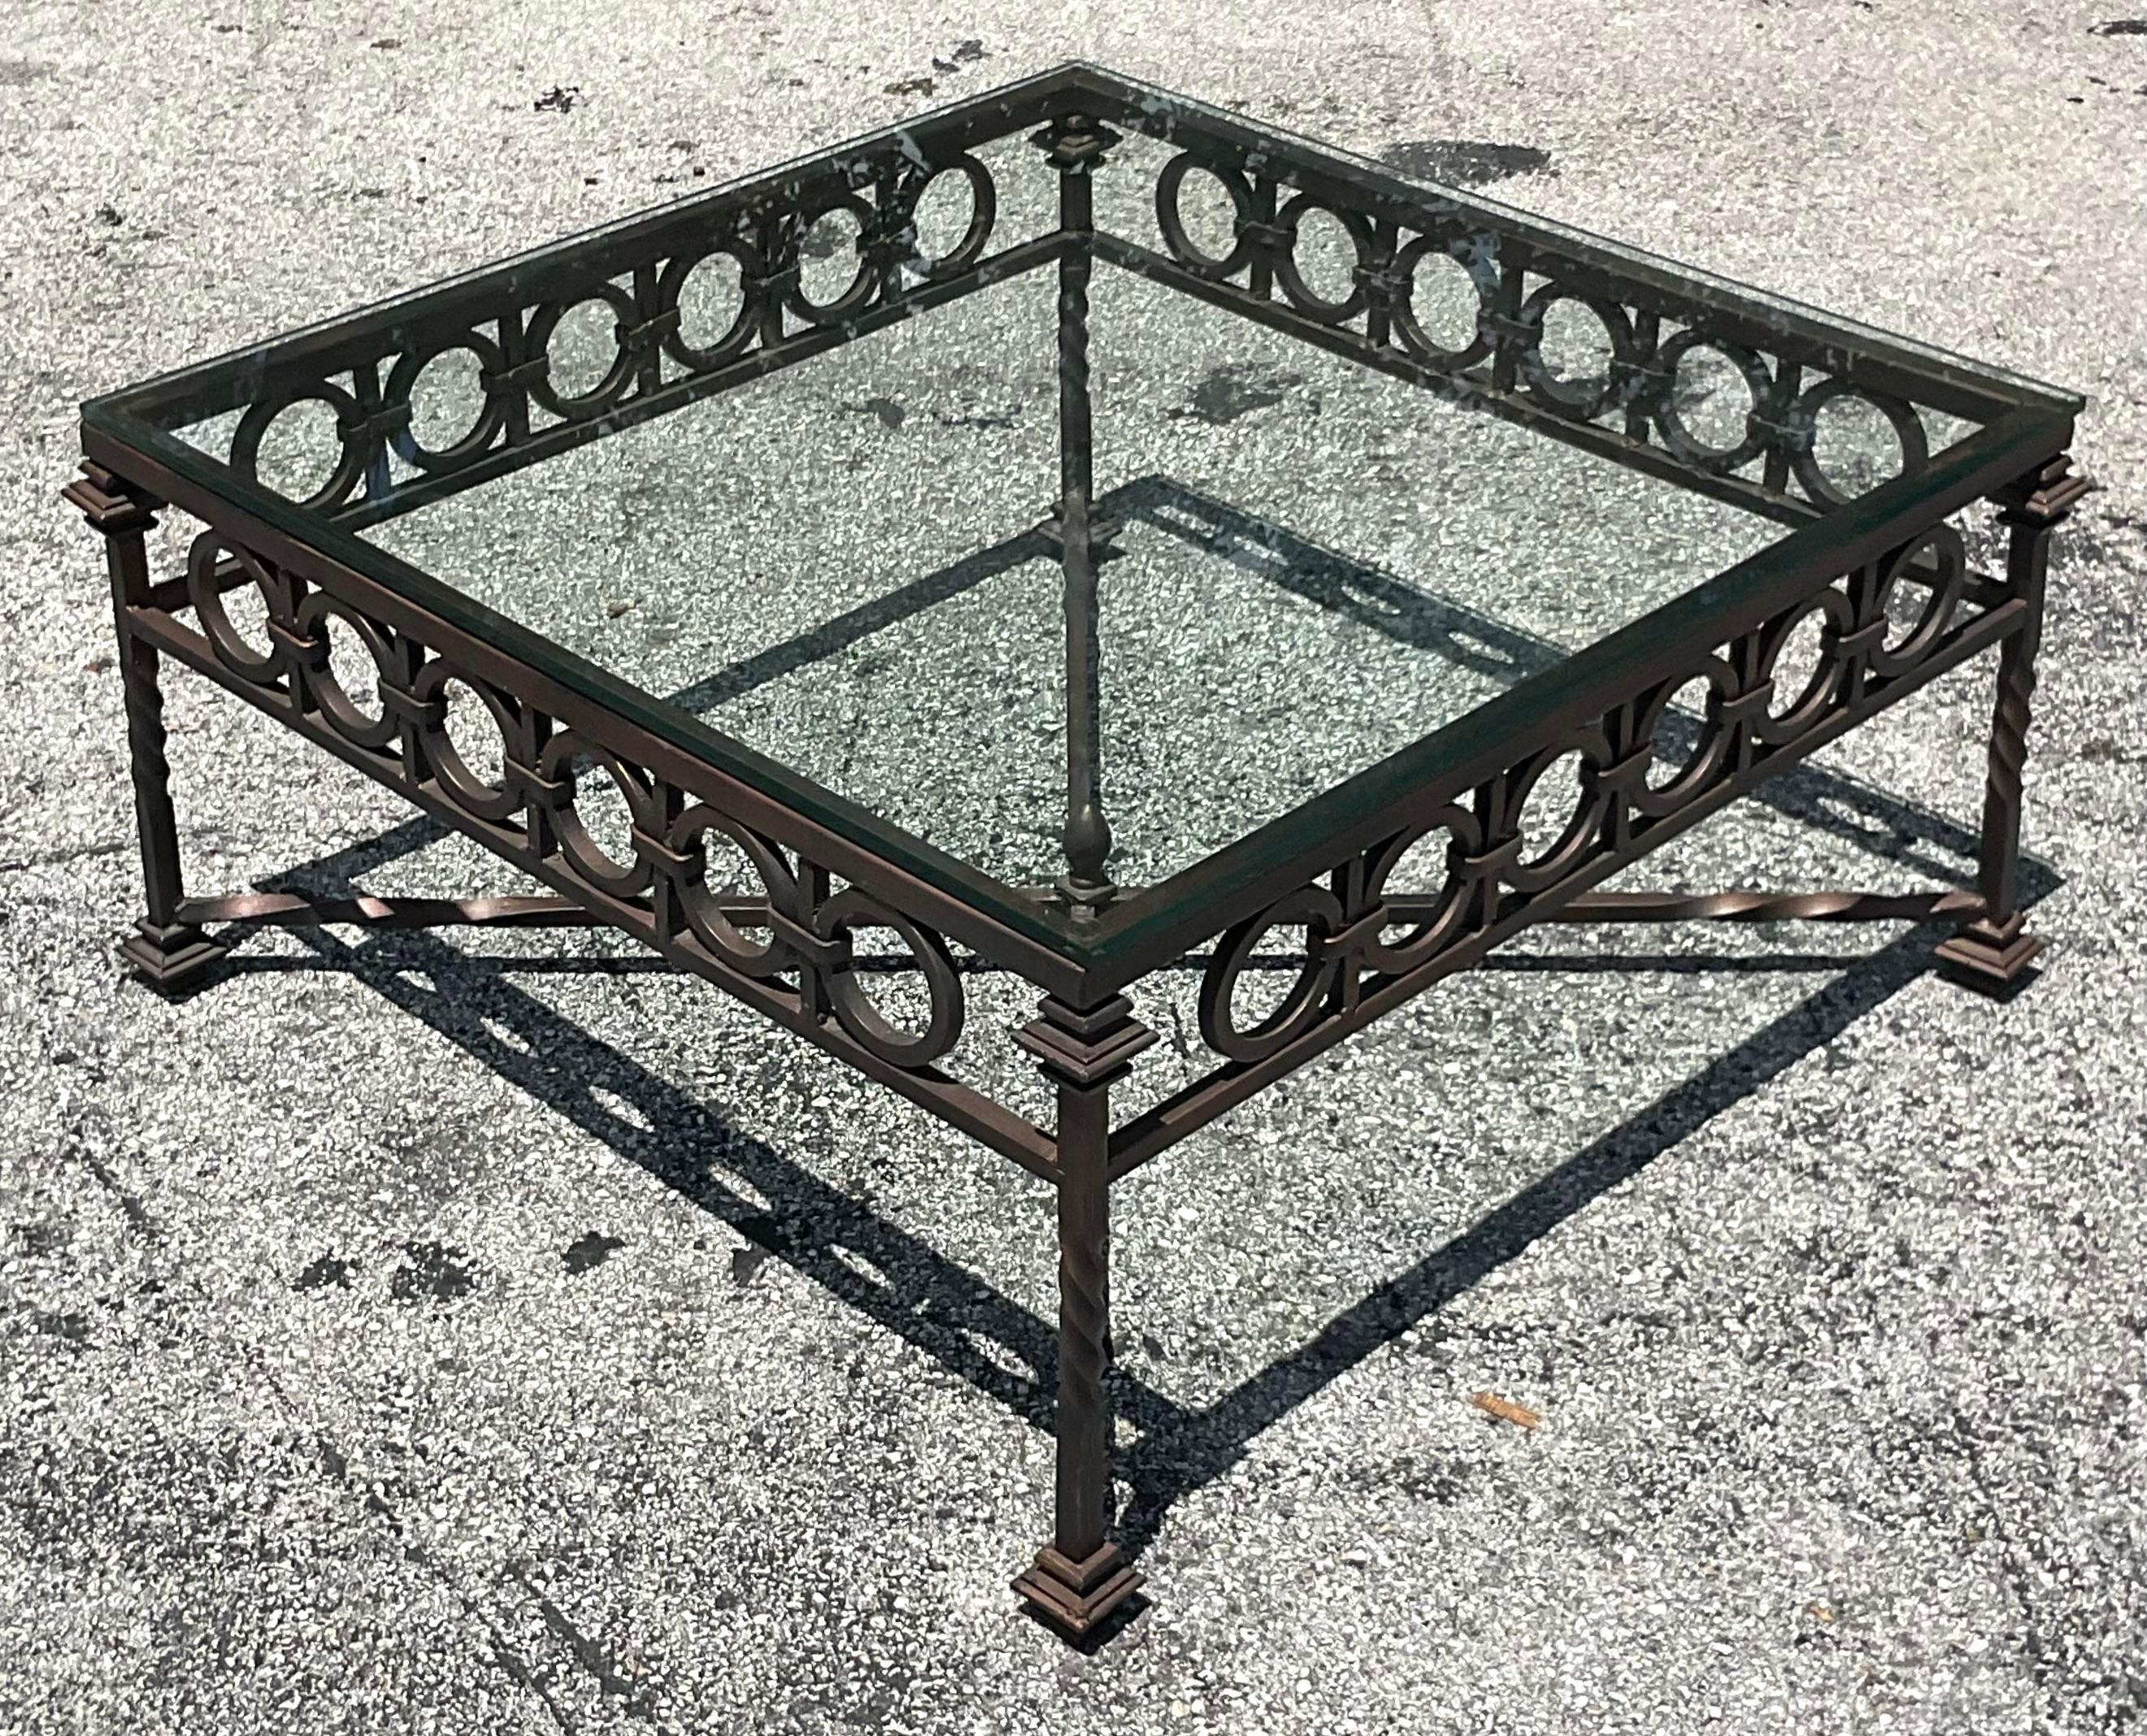 Bring a touch of vintage elegance to your living space with this Vintage Regency Cast Aluminum Coffee Table. Crafted with timeless American design in mind, its intricate detailing and durable construction evoke the grandeur of classic Regency style,